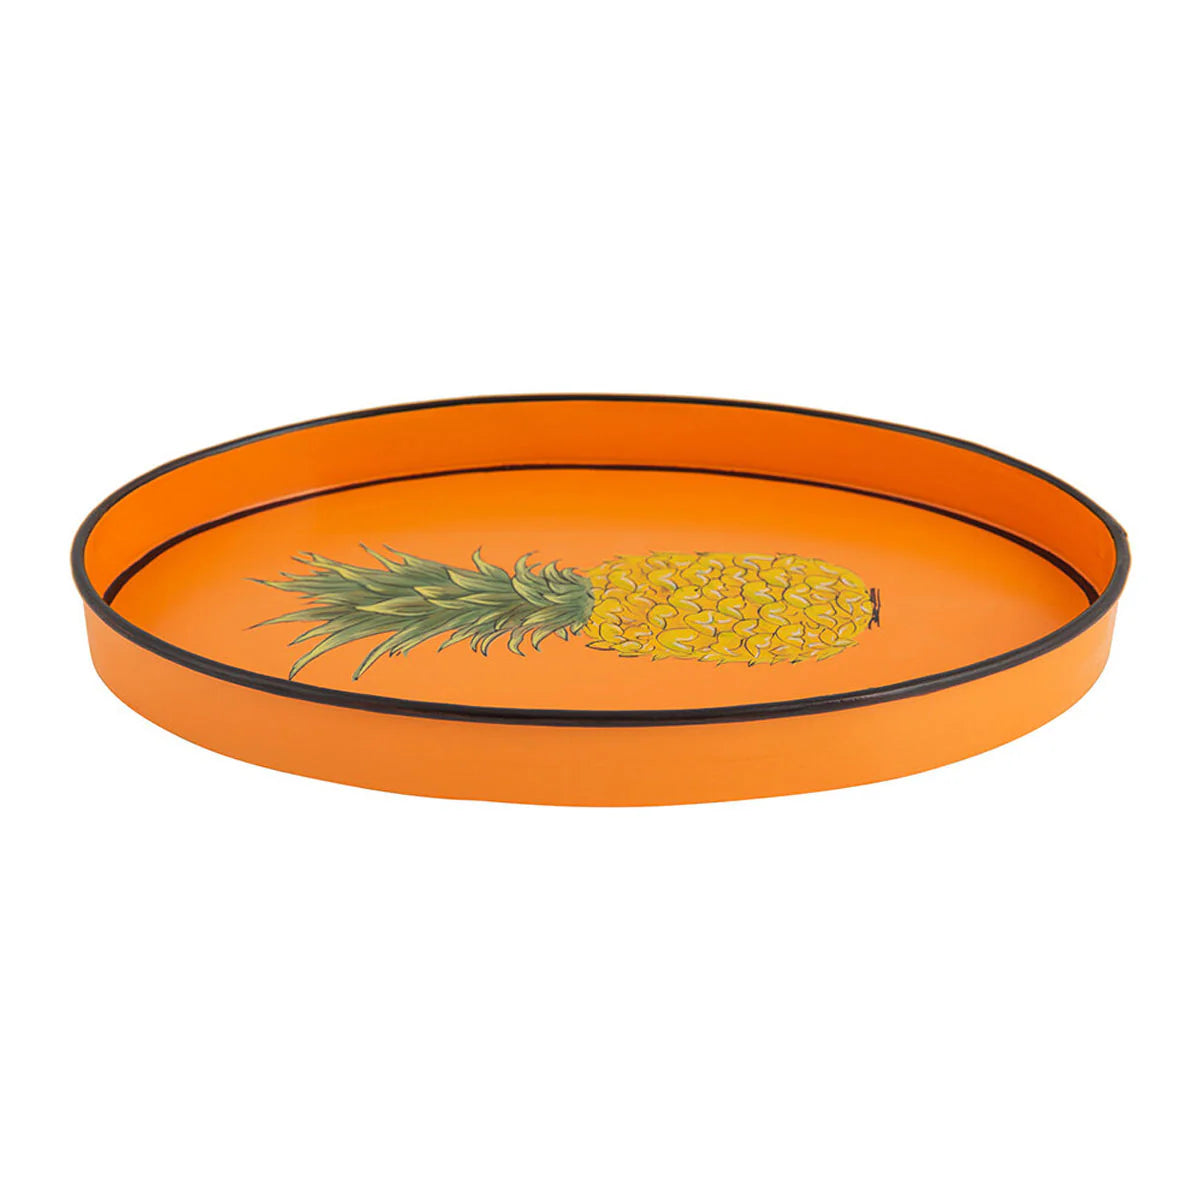 Les Ottomans FAUNA HAND-PAINTED IRON TRAYS IT76